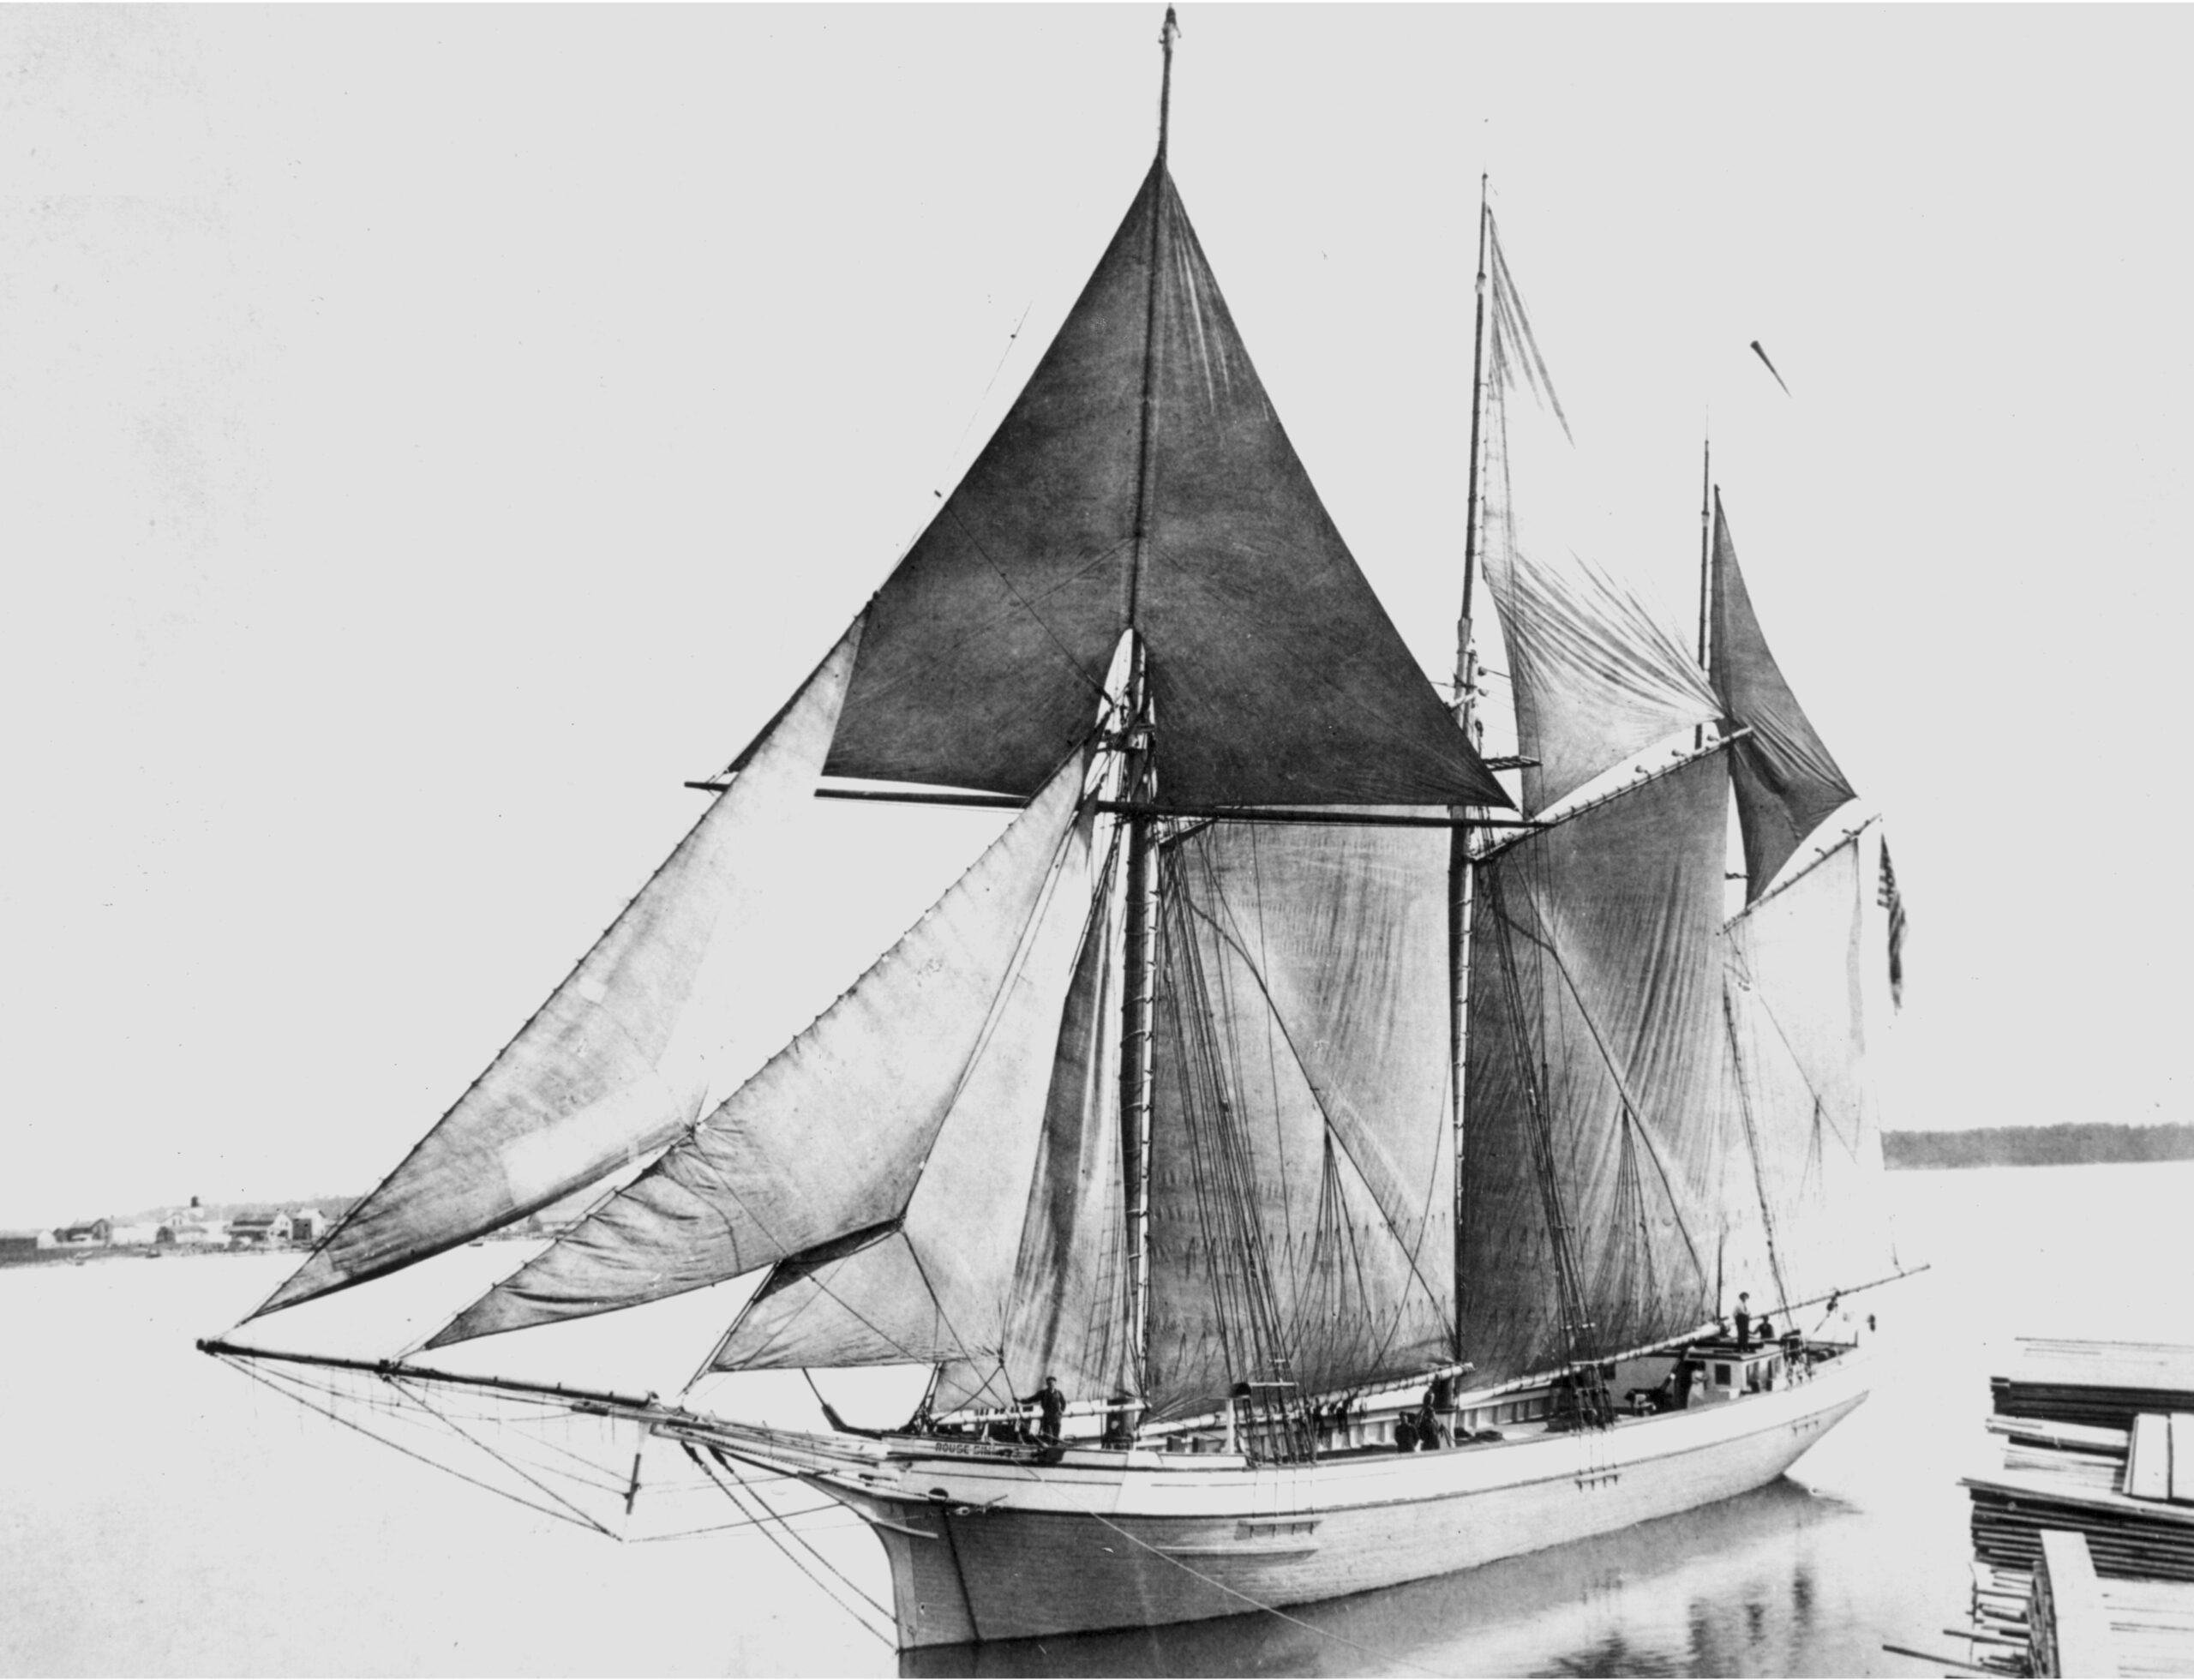 A black and white photo of a ship with sails: the Rouse Simmons